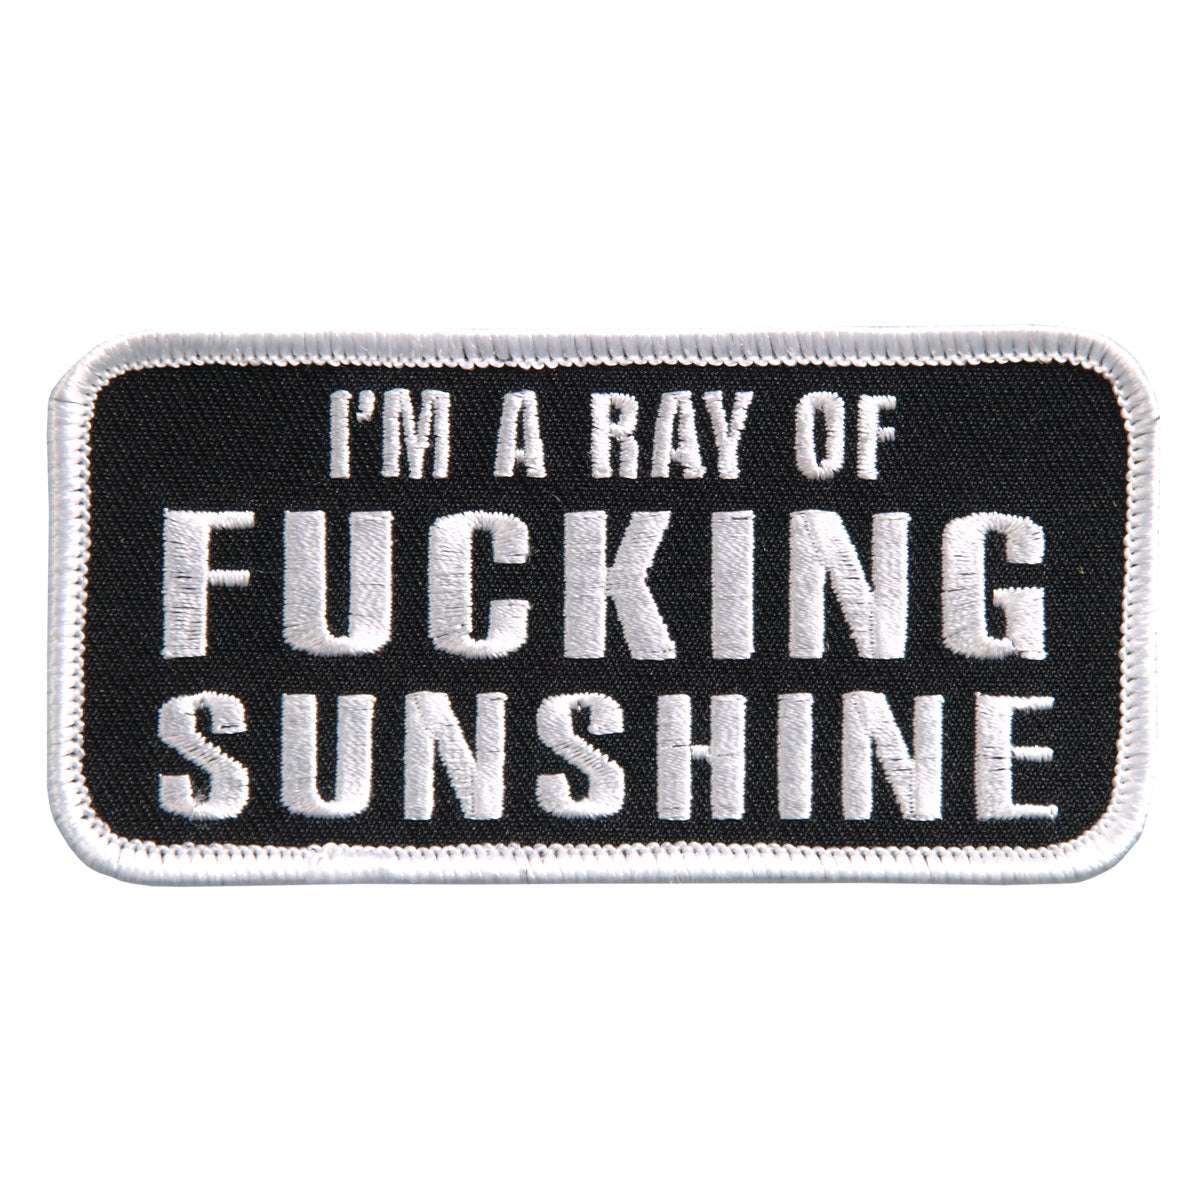 Hot Leathers I'm A Ray of Sunshine Embroidered 4" 4" x 2" Patch PPL9404